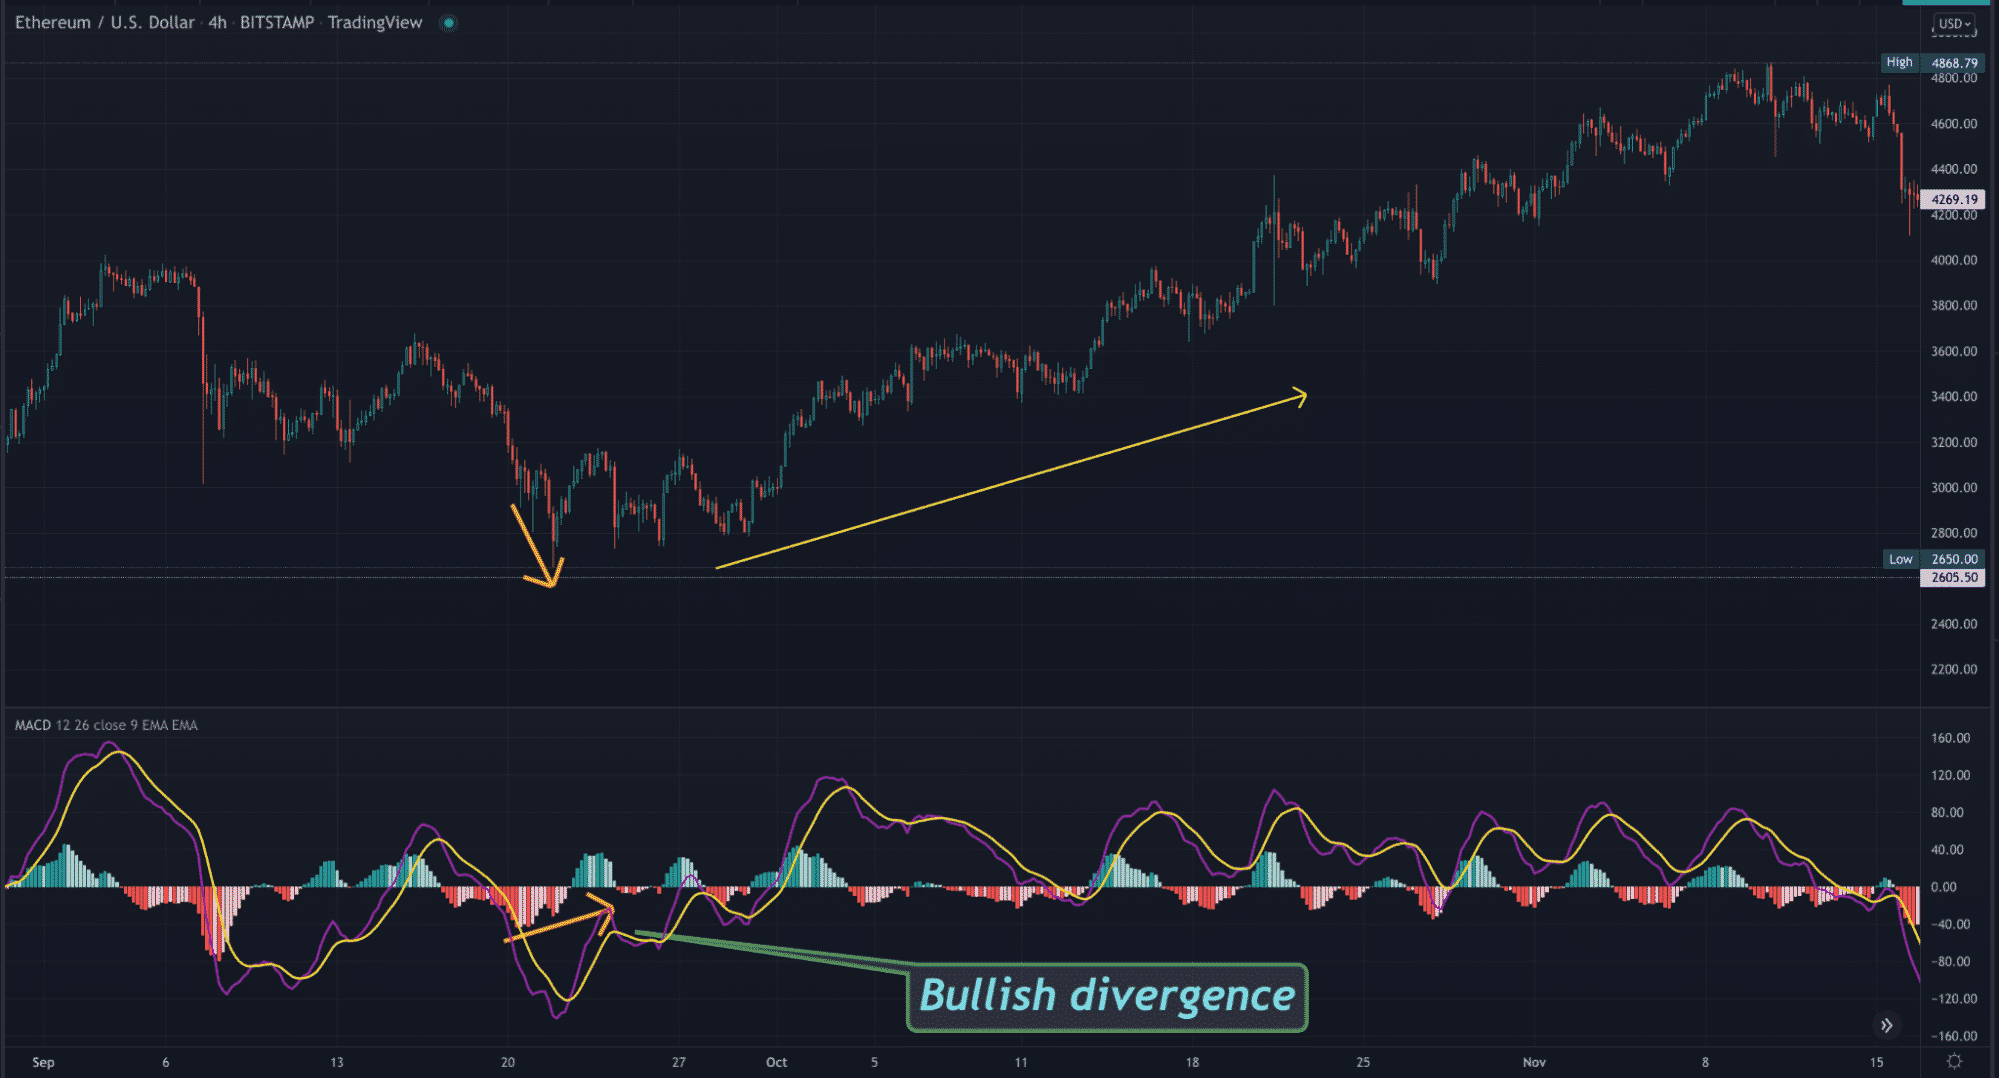 TradingView chart with the MACD